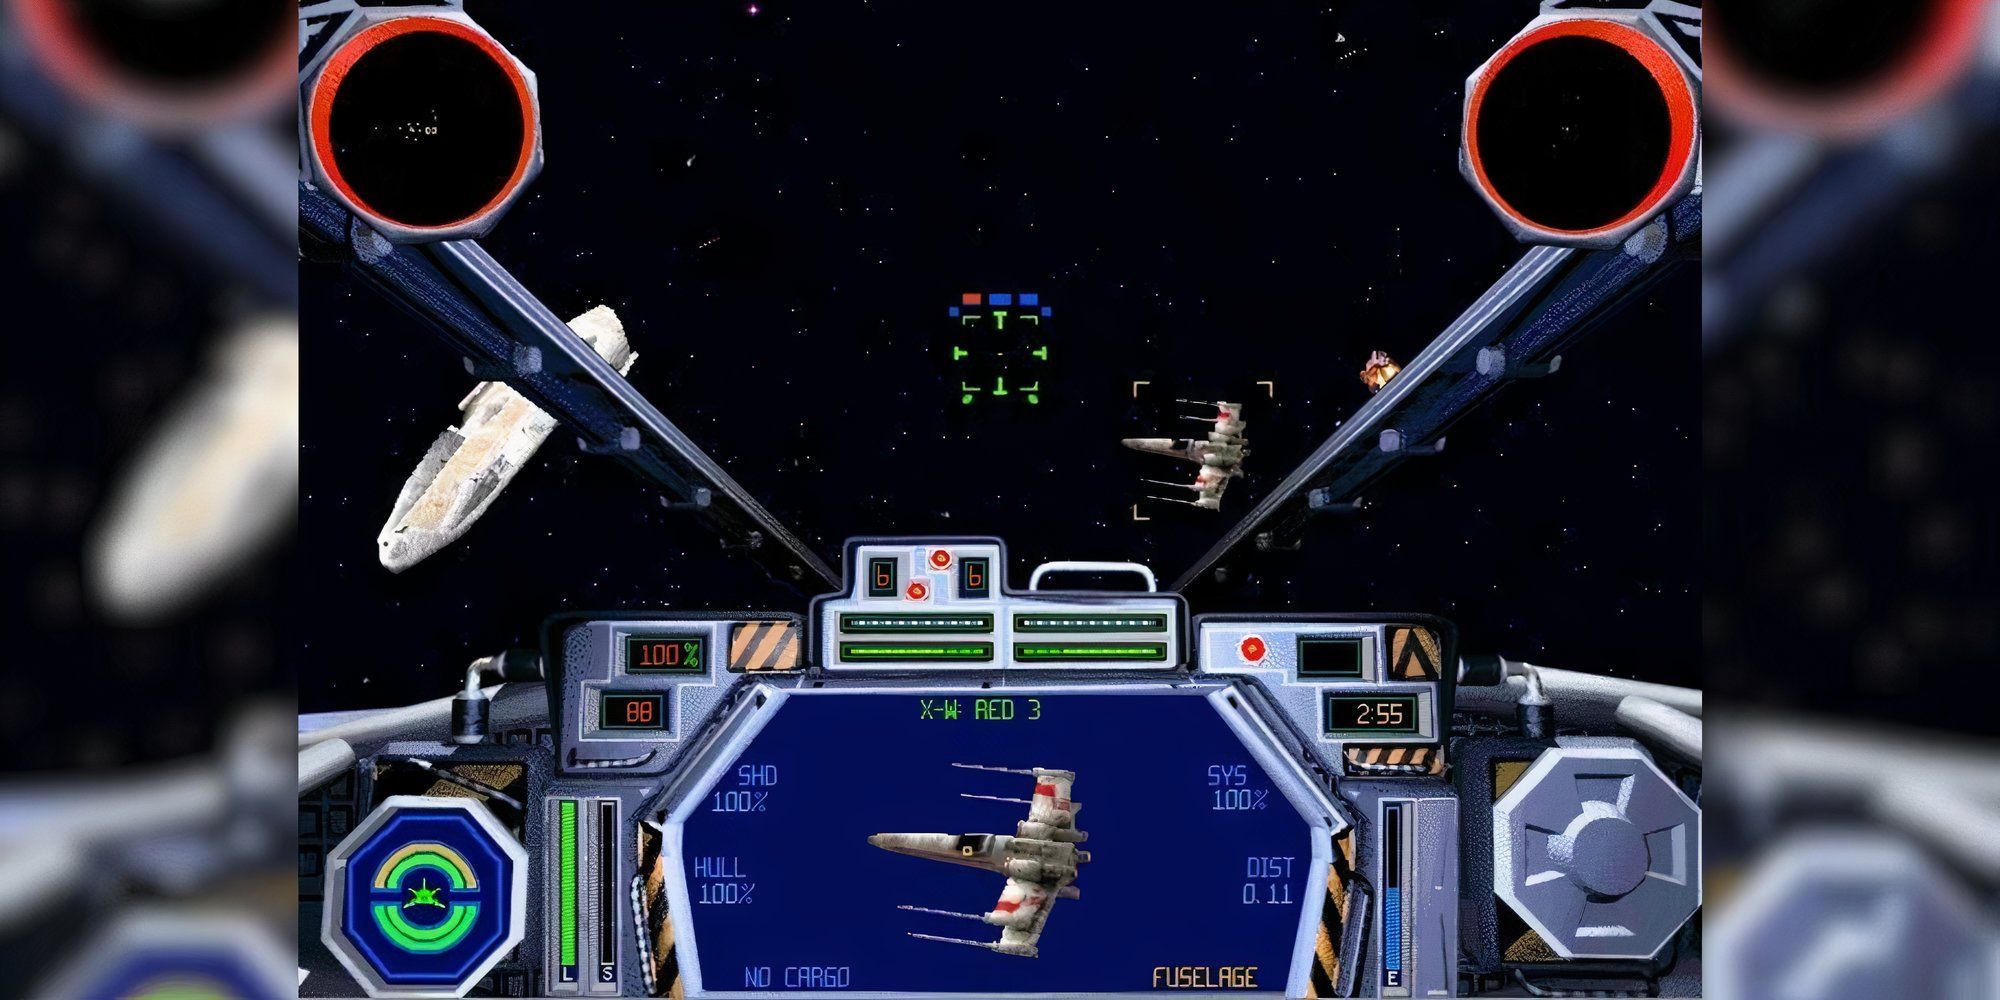 Still from Star Wars: TIE Fighter showing the pilot's deck of a spaceship.